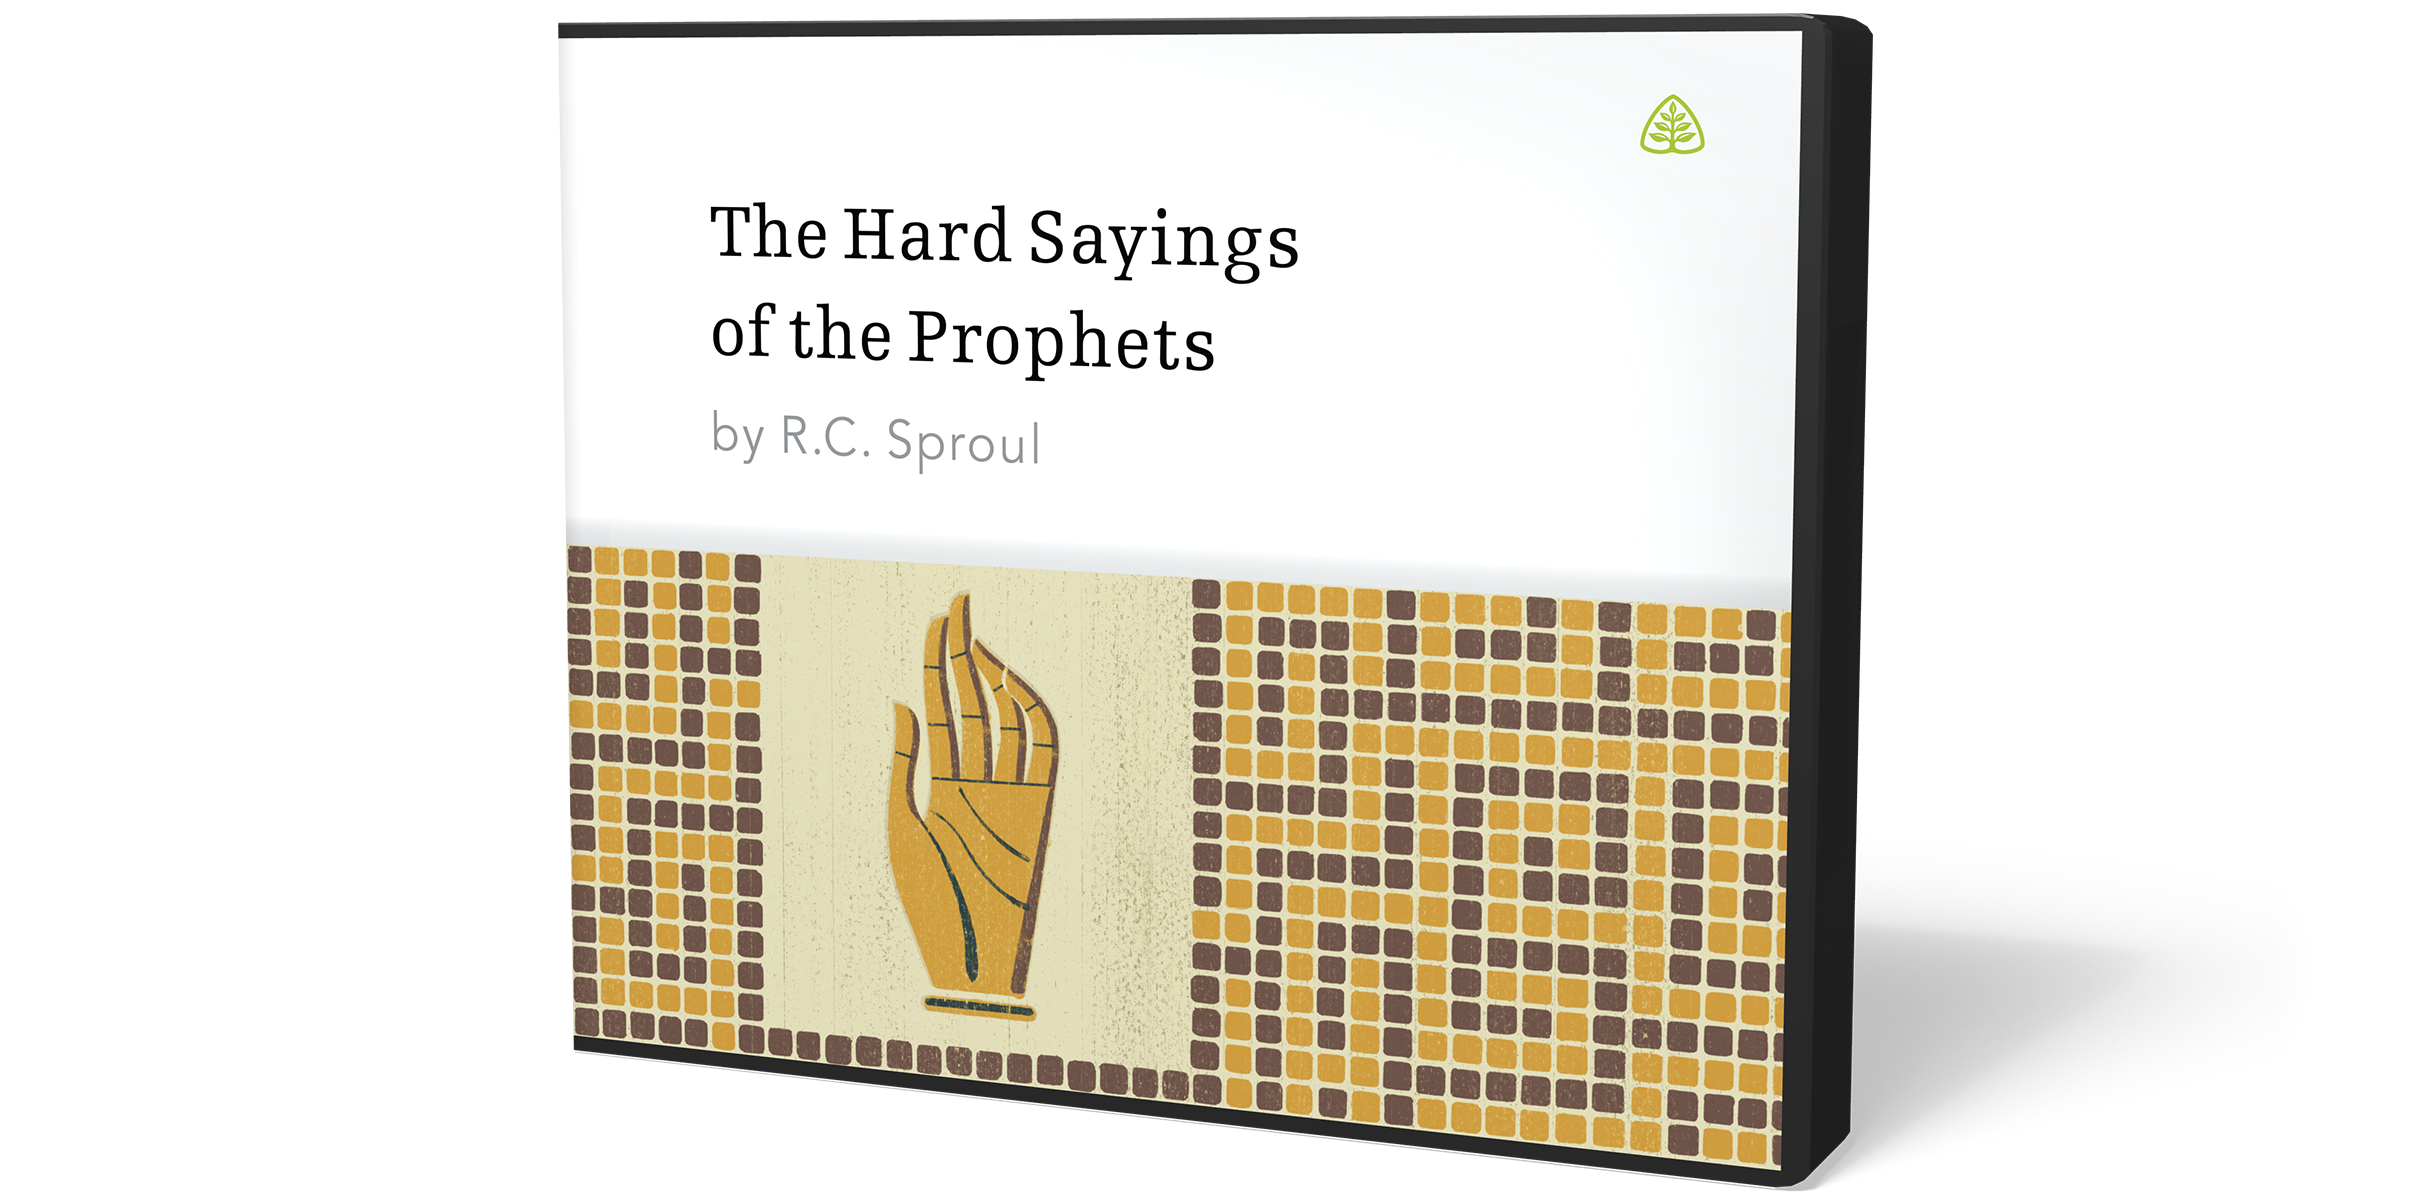 The Hard Sayings of the Prophets